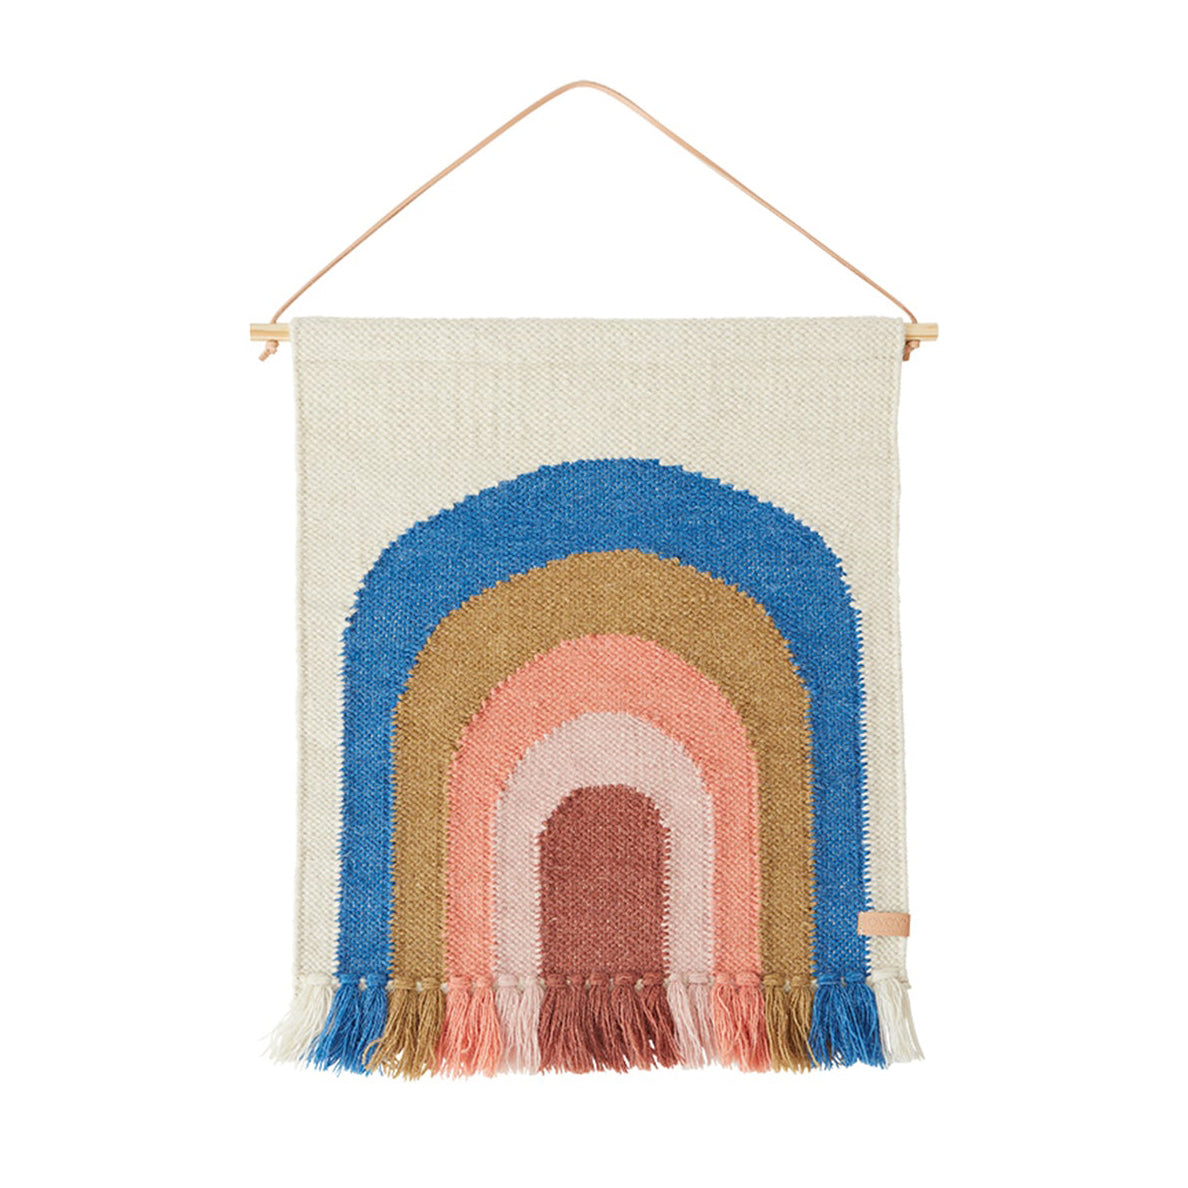 Follow The Rainbow Mini Wall Rug (Available in 2 colors)